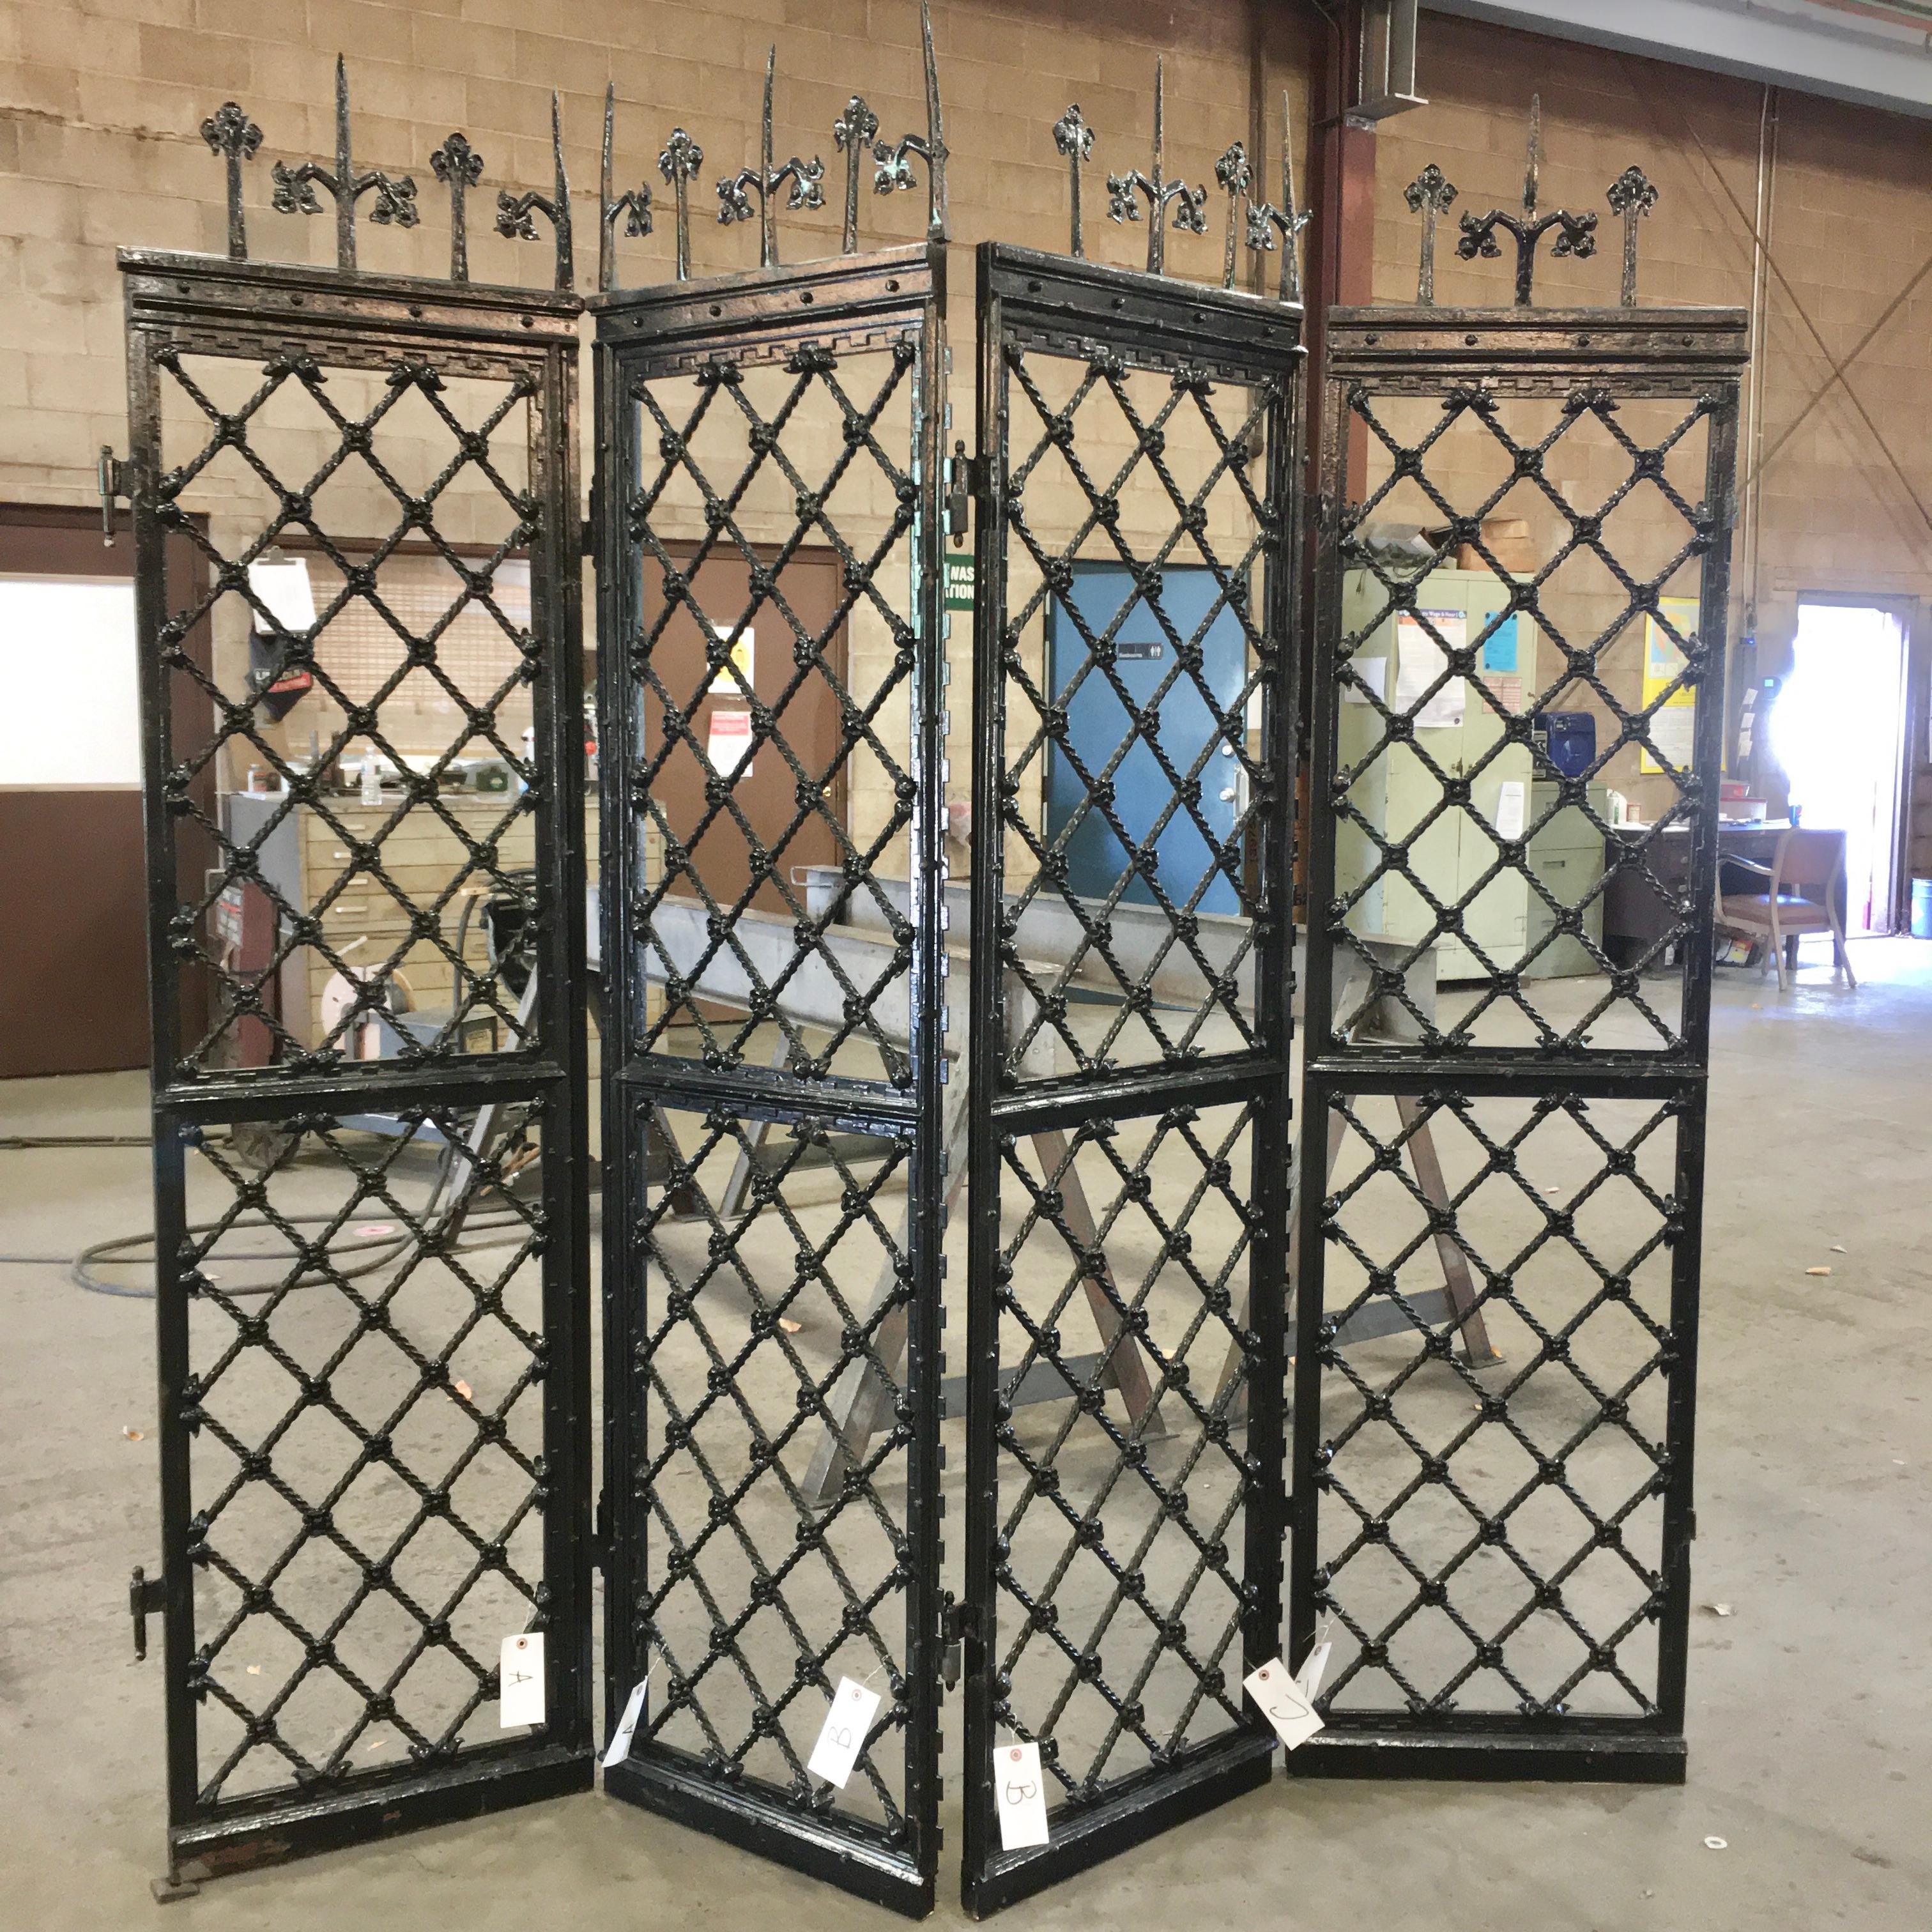 SATURDAY SALE

These early 20th century wrought iron hinged panels or grilles came from the 775 Grove St, Glencoe, IL home of encyclopedia publisher Frank E. Compton.
Each panel weights ~100 pounds, is 74 inches high (84 inches to top of gothic